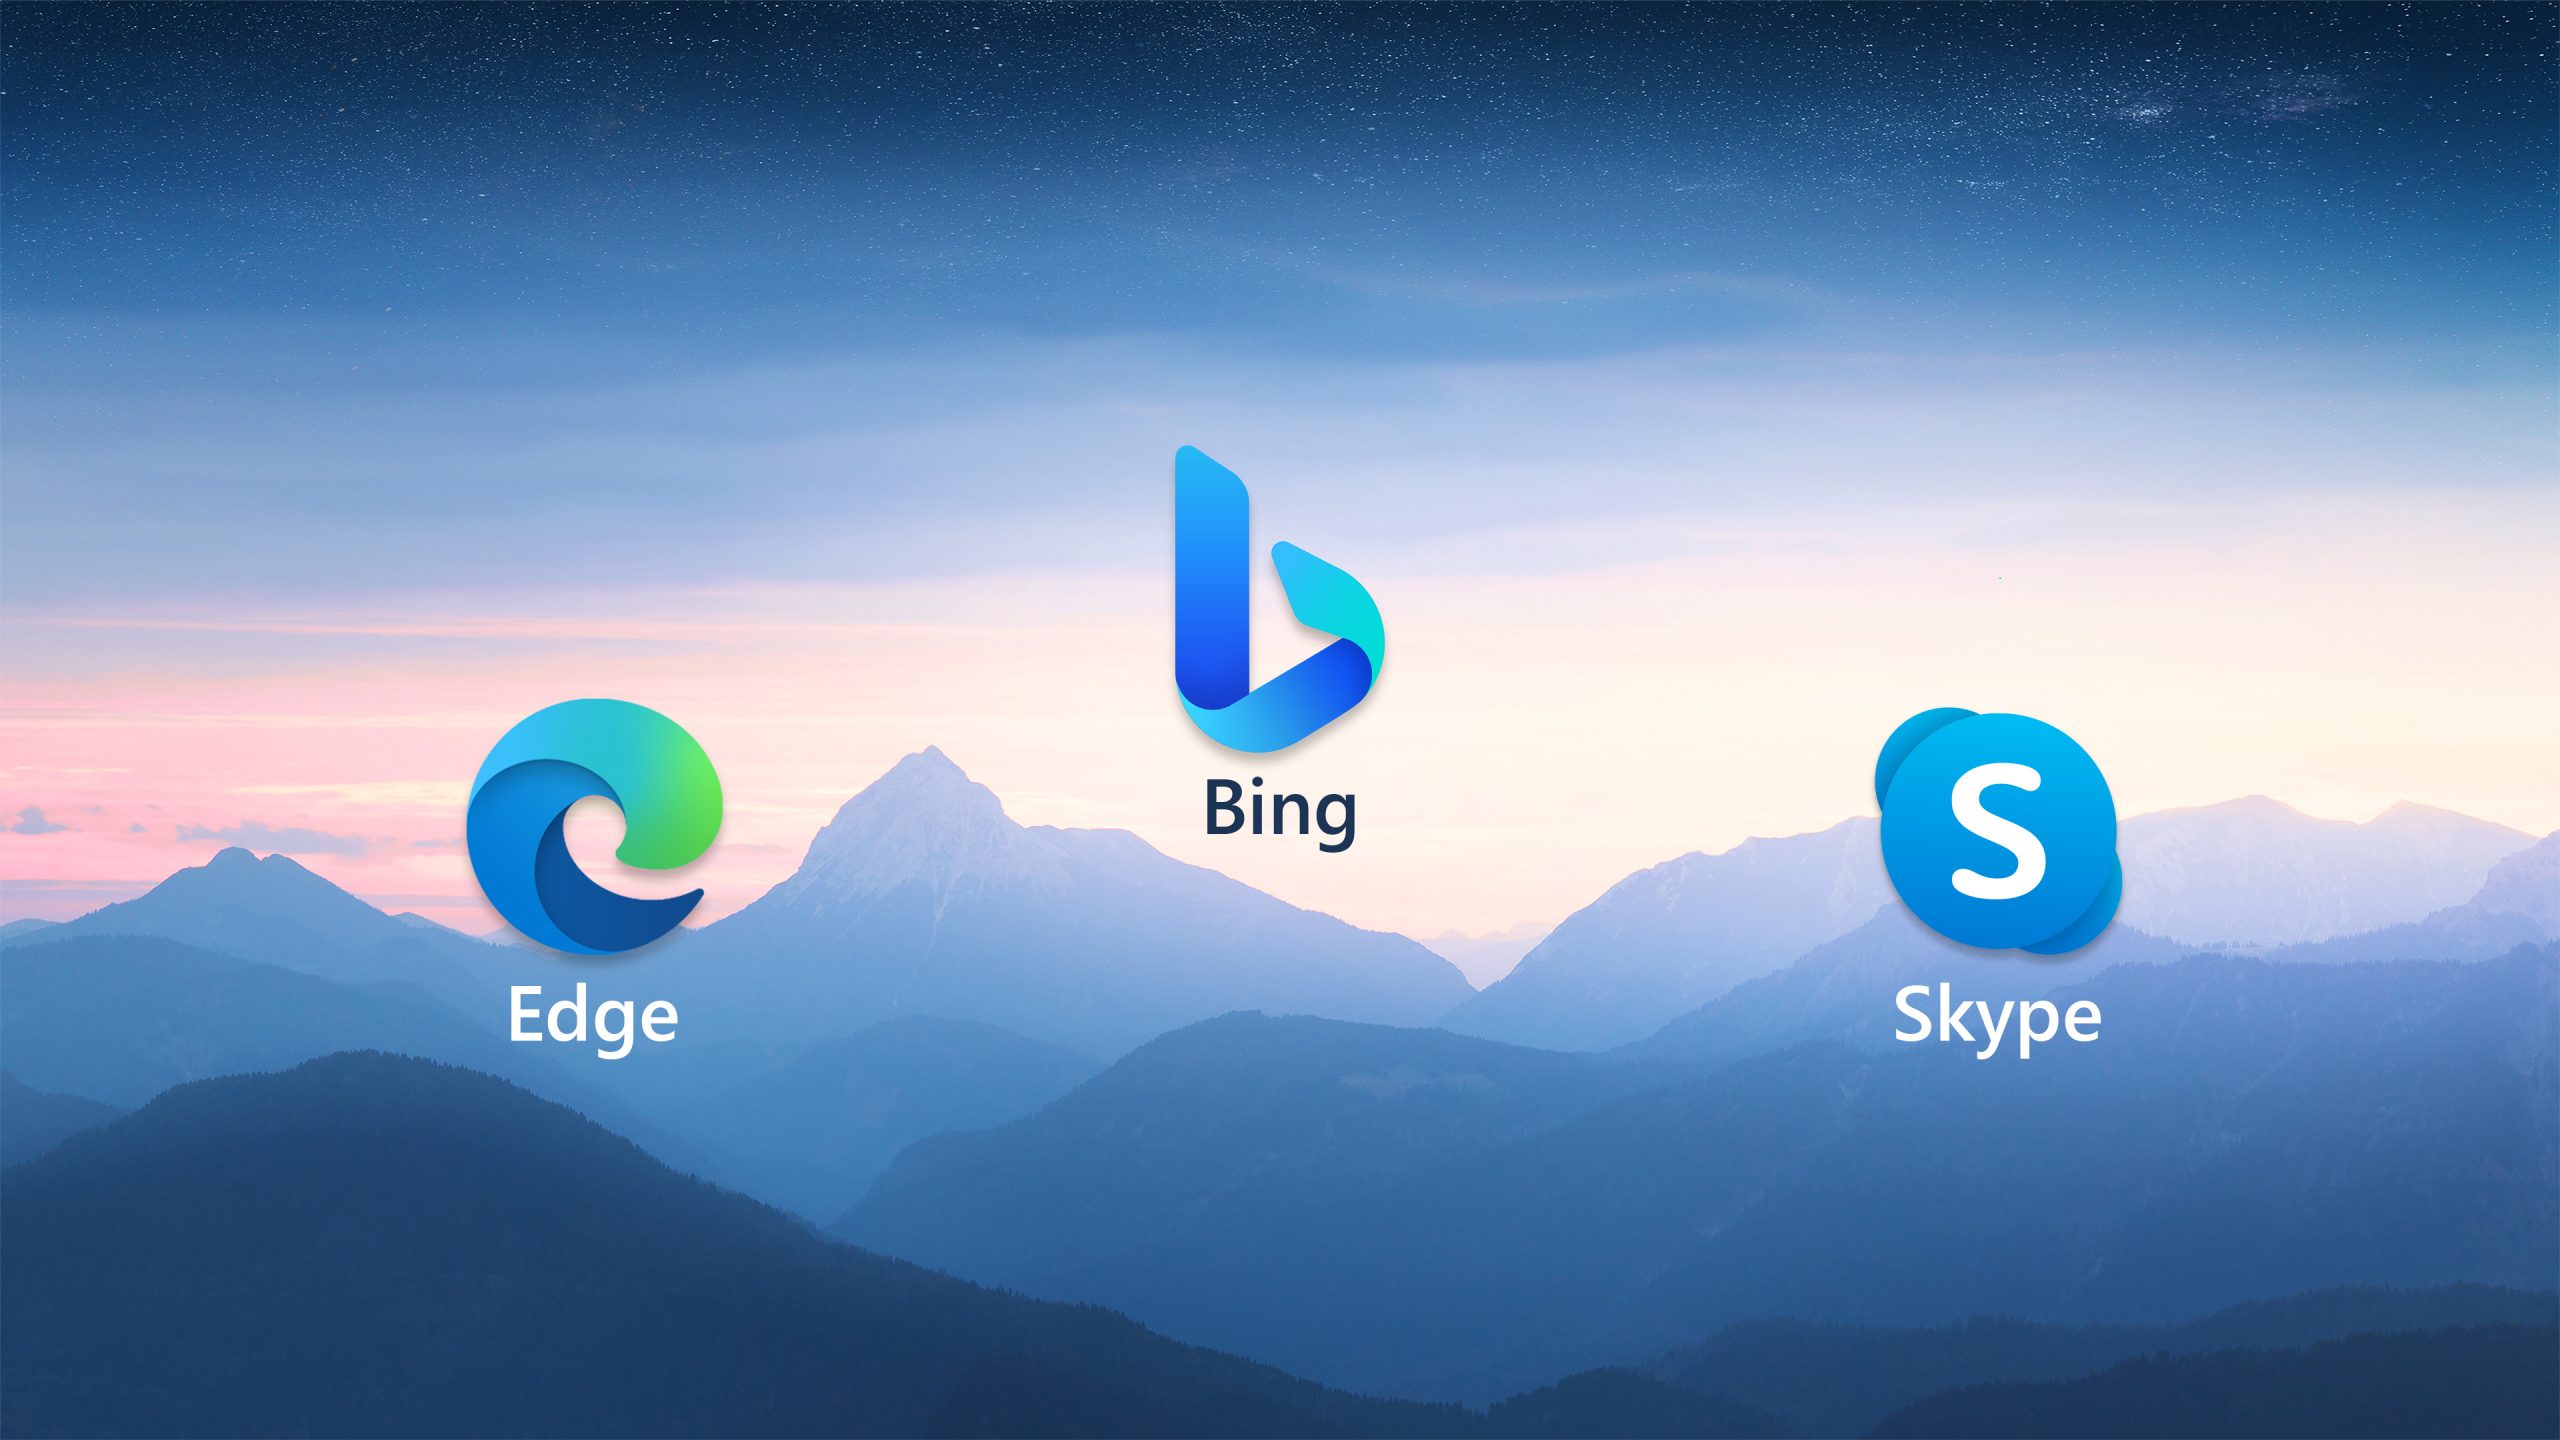 The New Microsoft Bing Experience – Why You Should Give It a Try